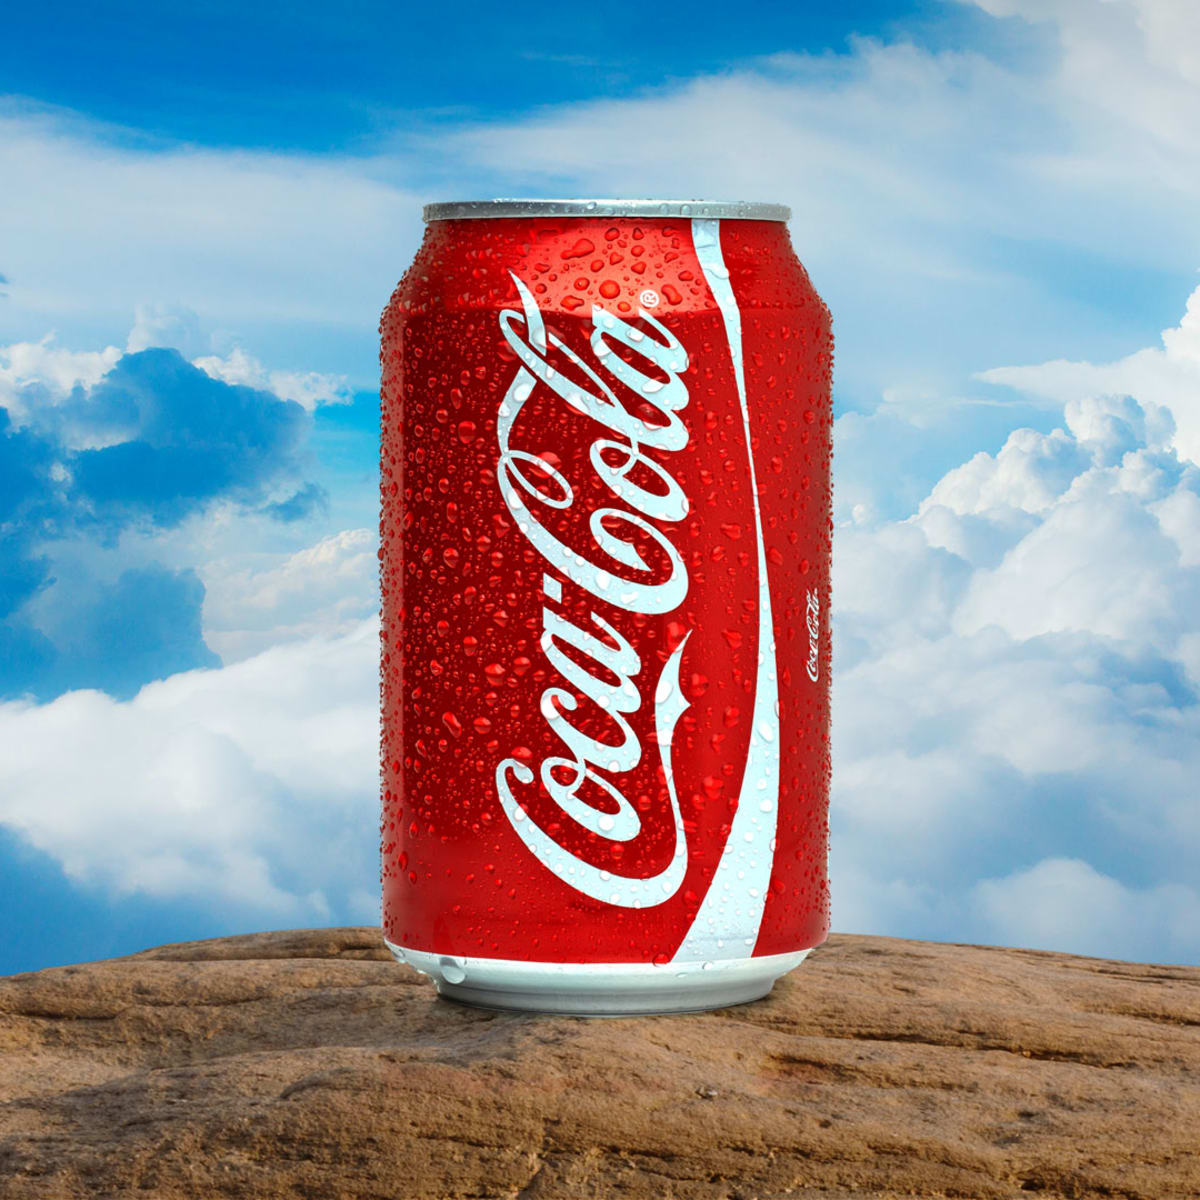 Coca-Cola has a new soda for Diet Coke fans - TheStreet